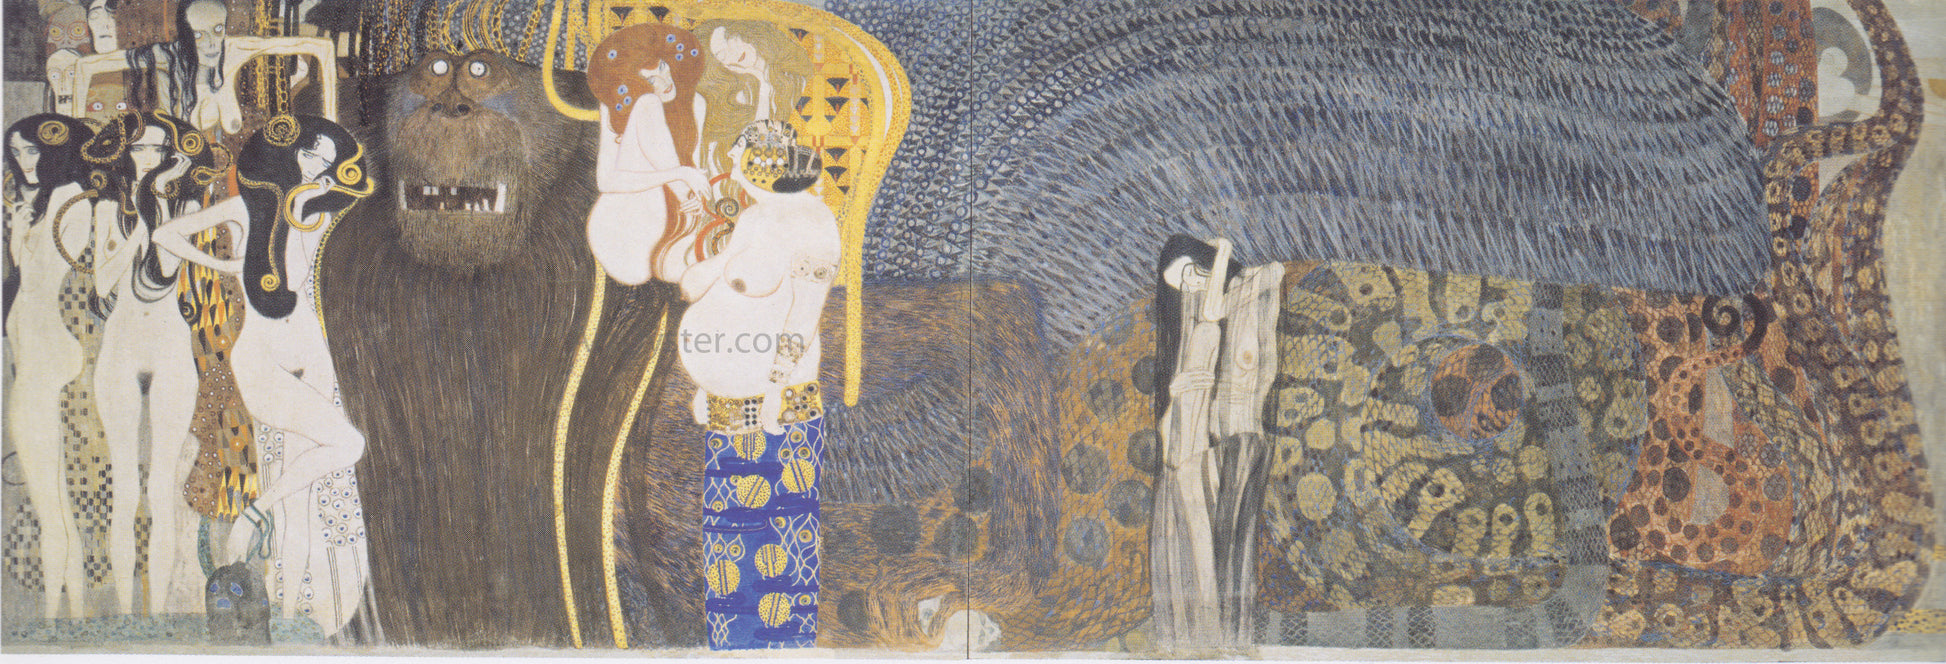  Gustav Klimt The Beethoven Frieze the Hostile Powers Far Wall - Hand Painted Oil Painting